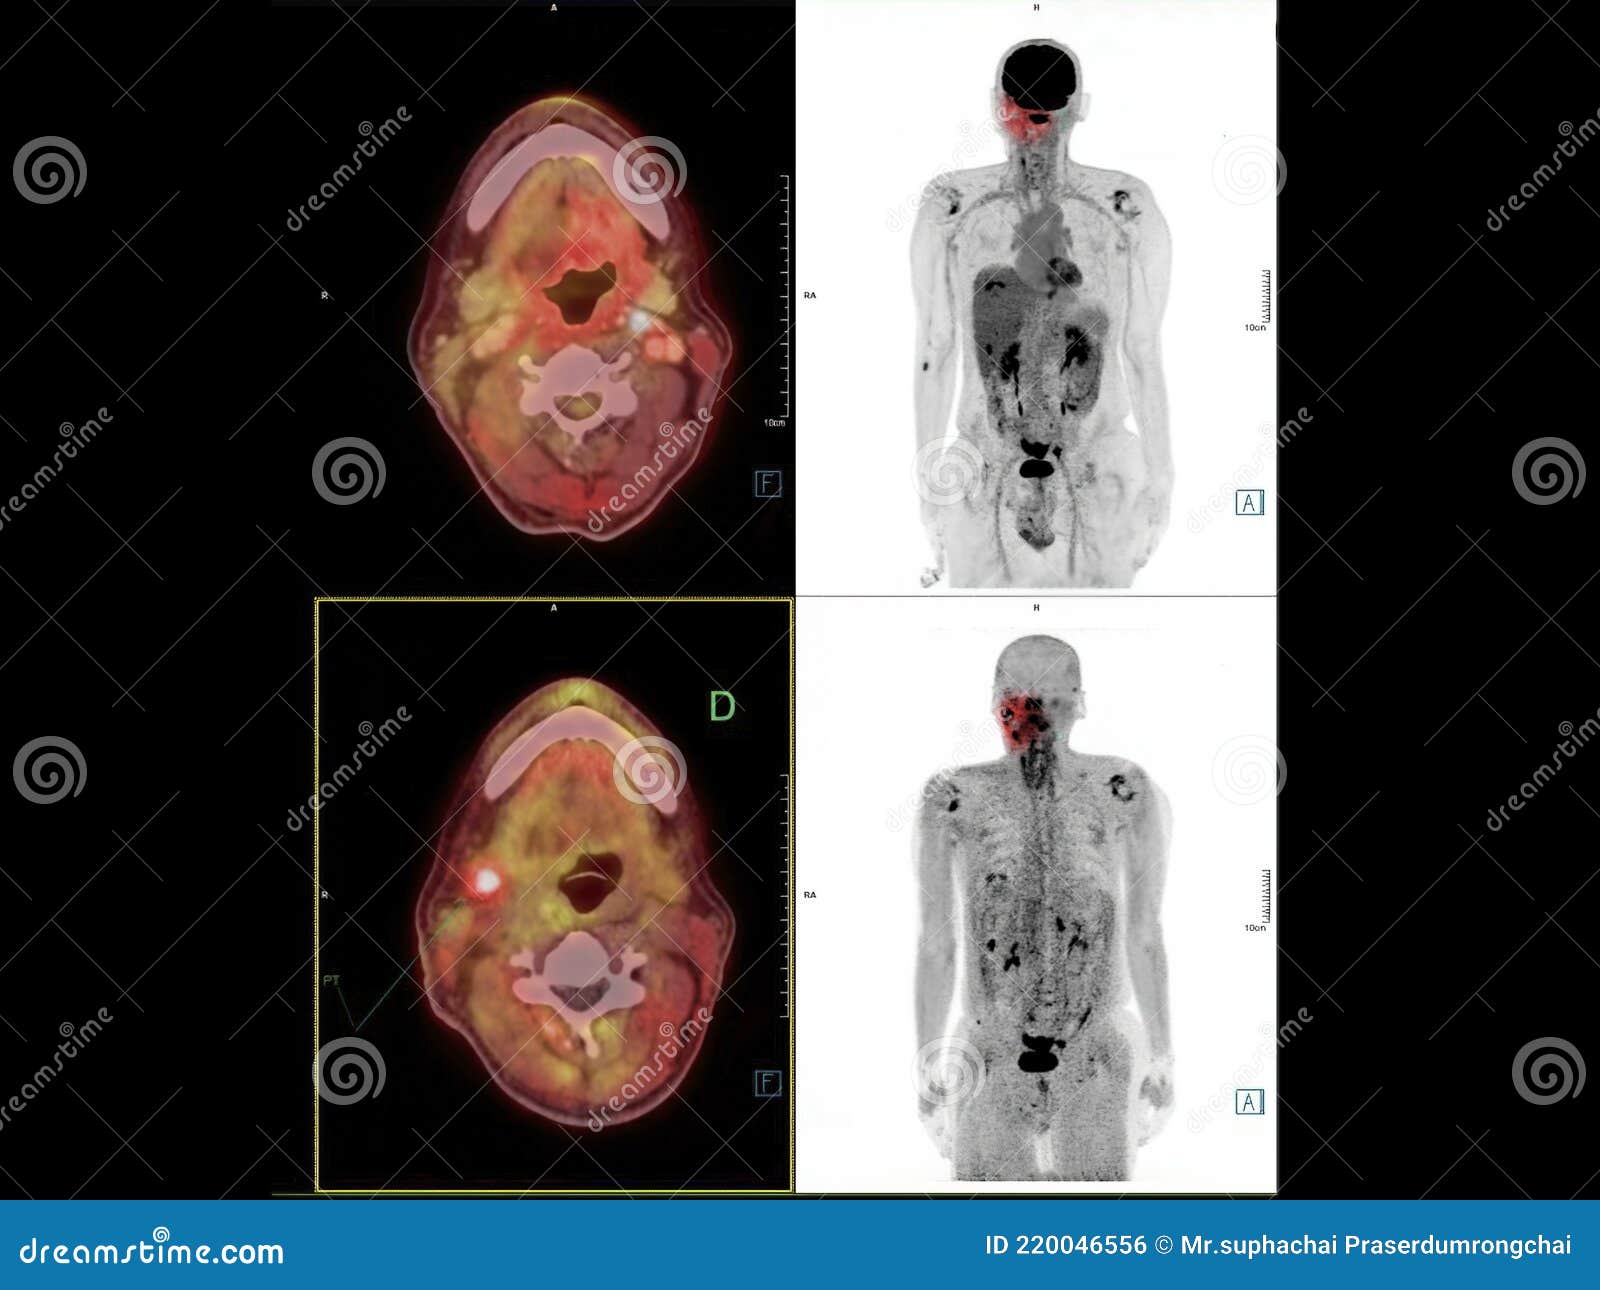 pet ct image of the neck showing ca nasopharynx or carcinoma of nasopharynx from pet ct scannner